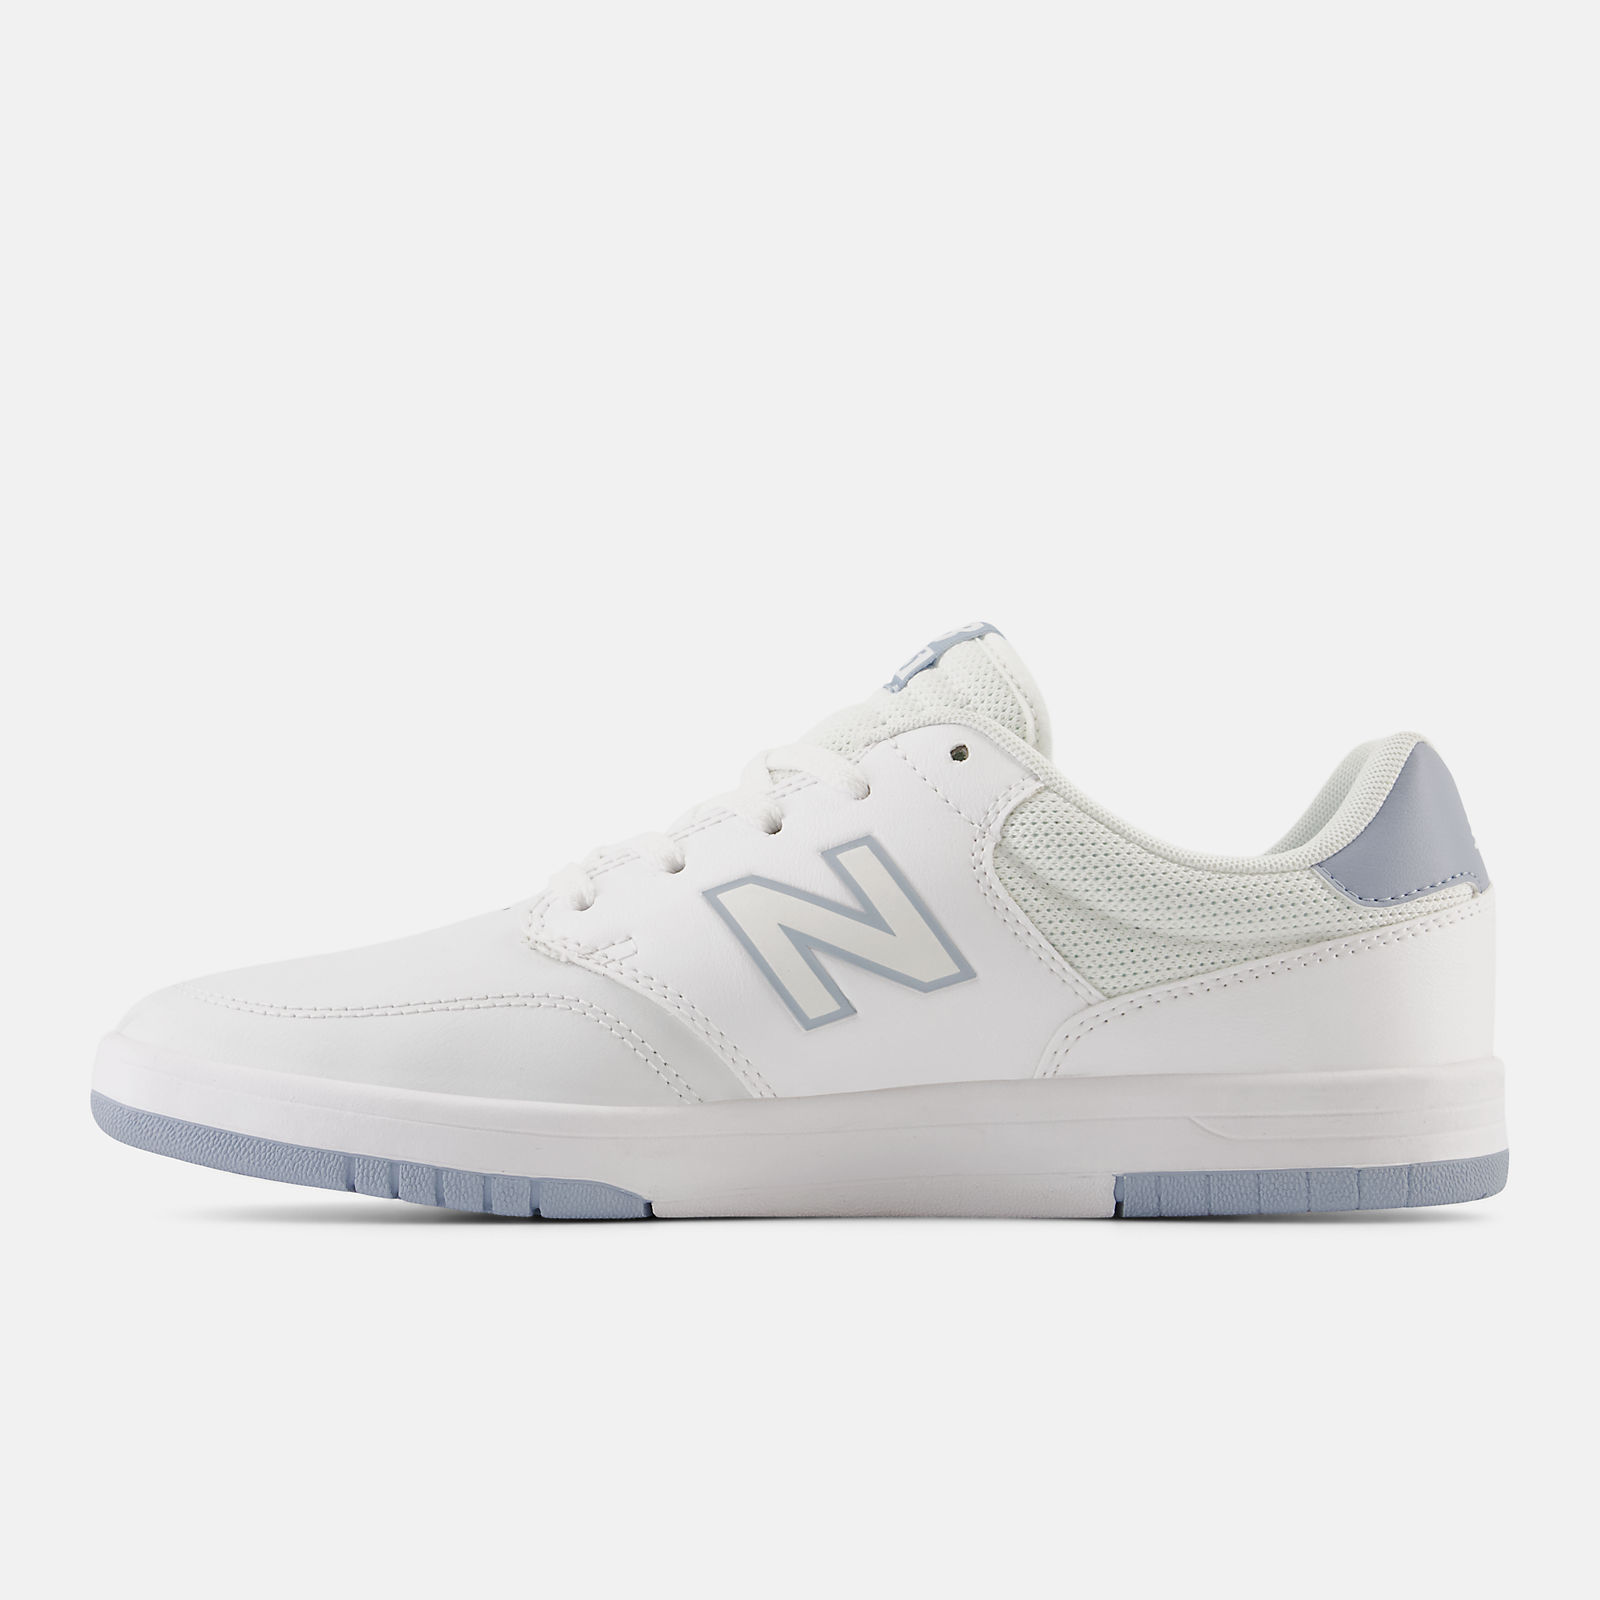 New Balance Numeric 425 Review: Is This the Ultimate Skate Shoe? You Wont Believe It!